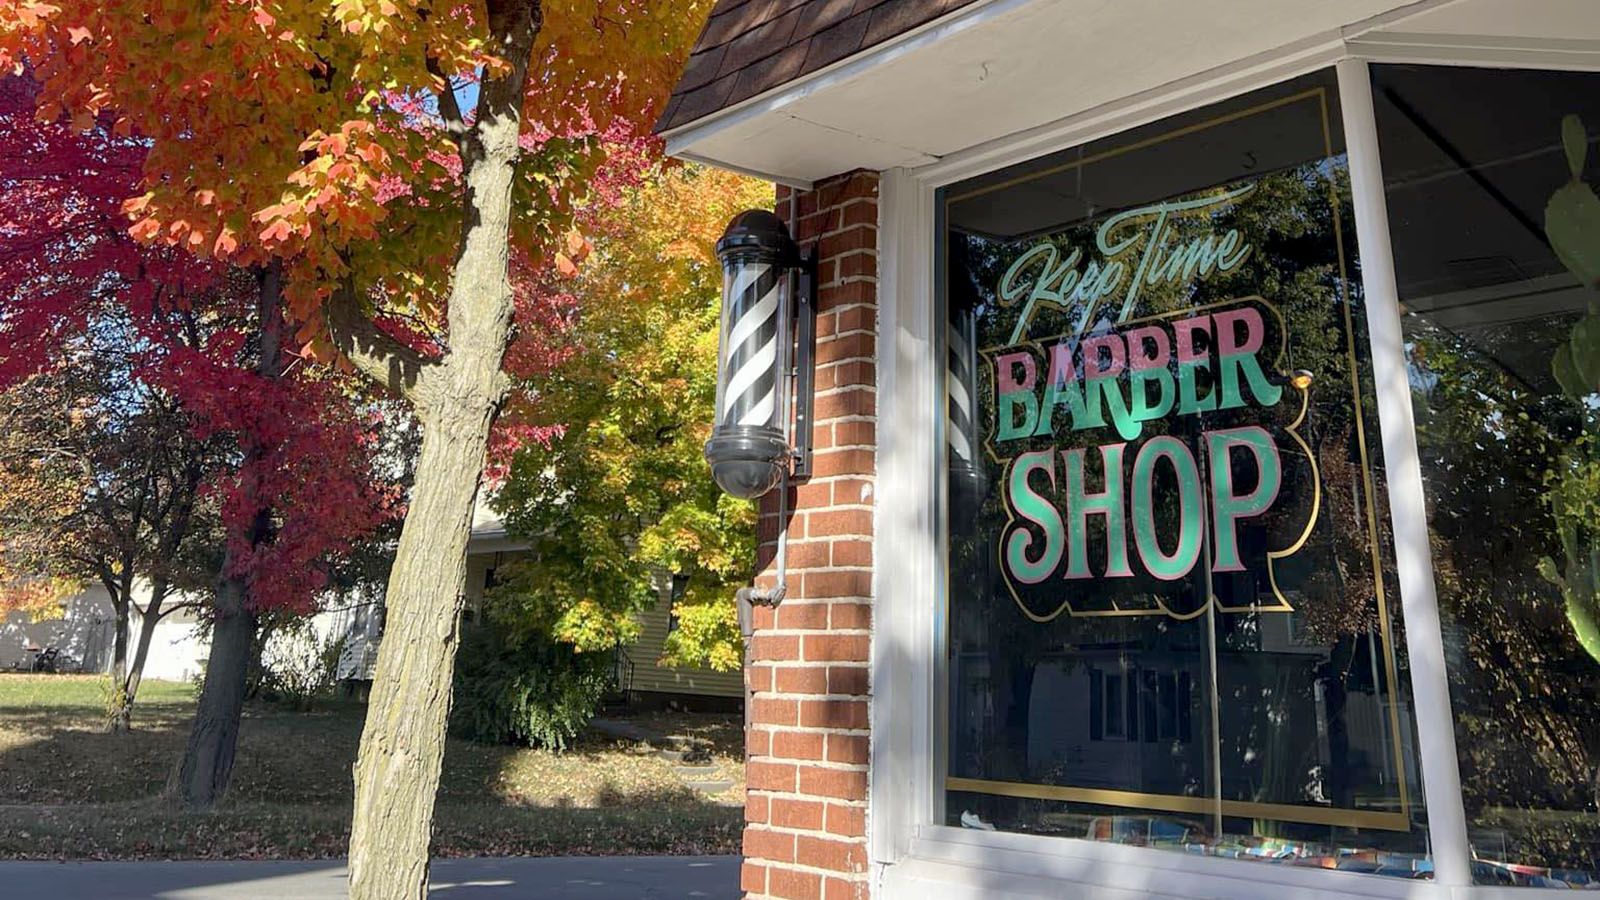 Keep Time Barbershop will marks its one-year anniversary with a party on Sunday, Sept. 3.